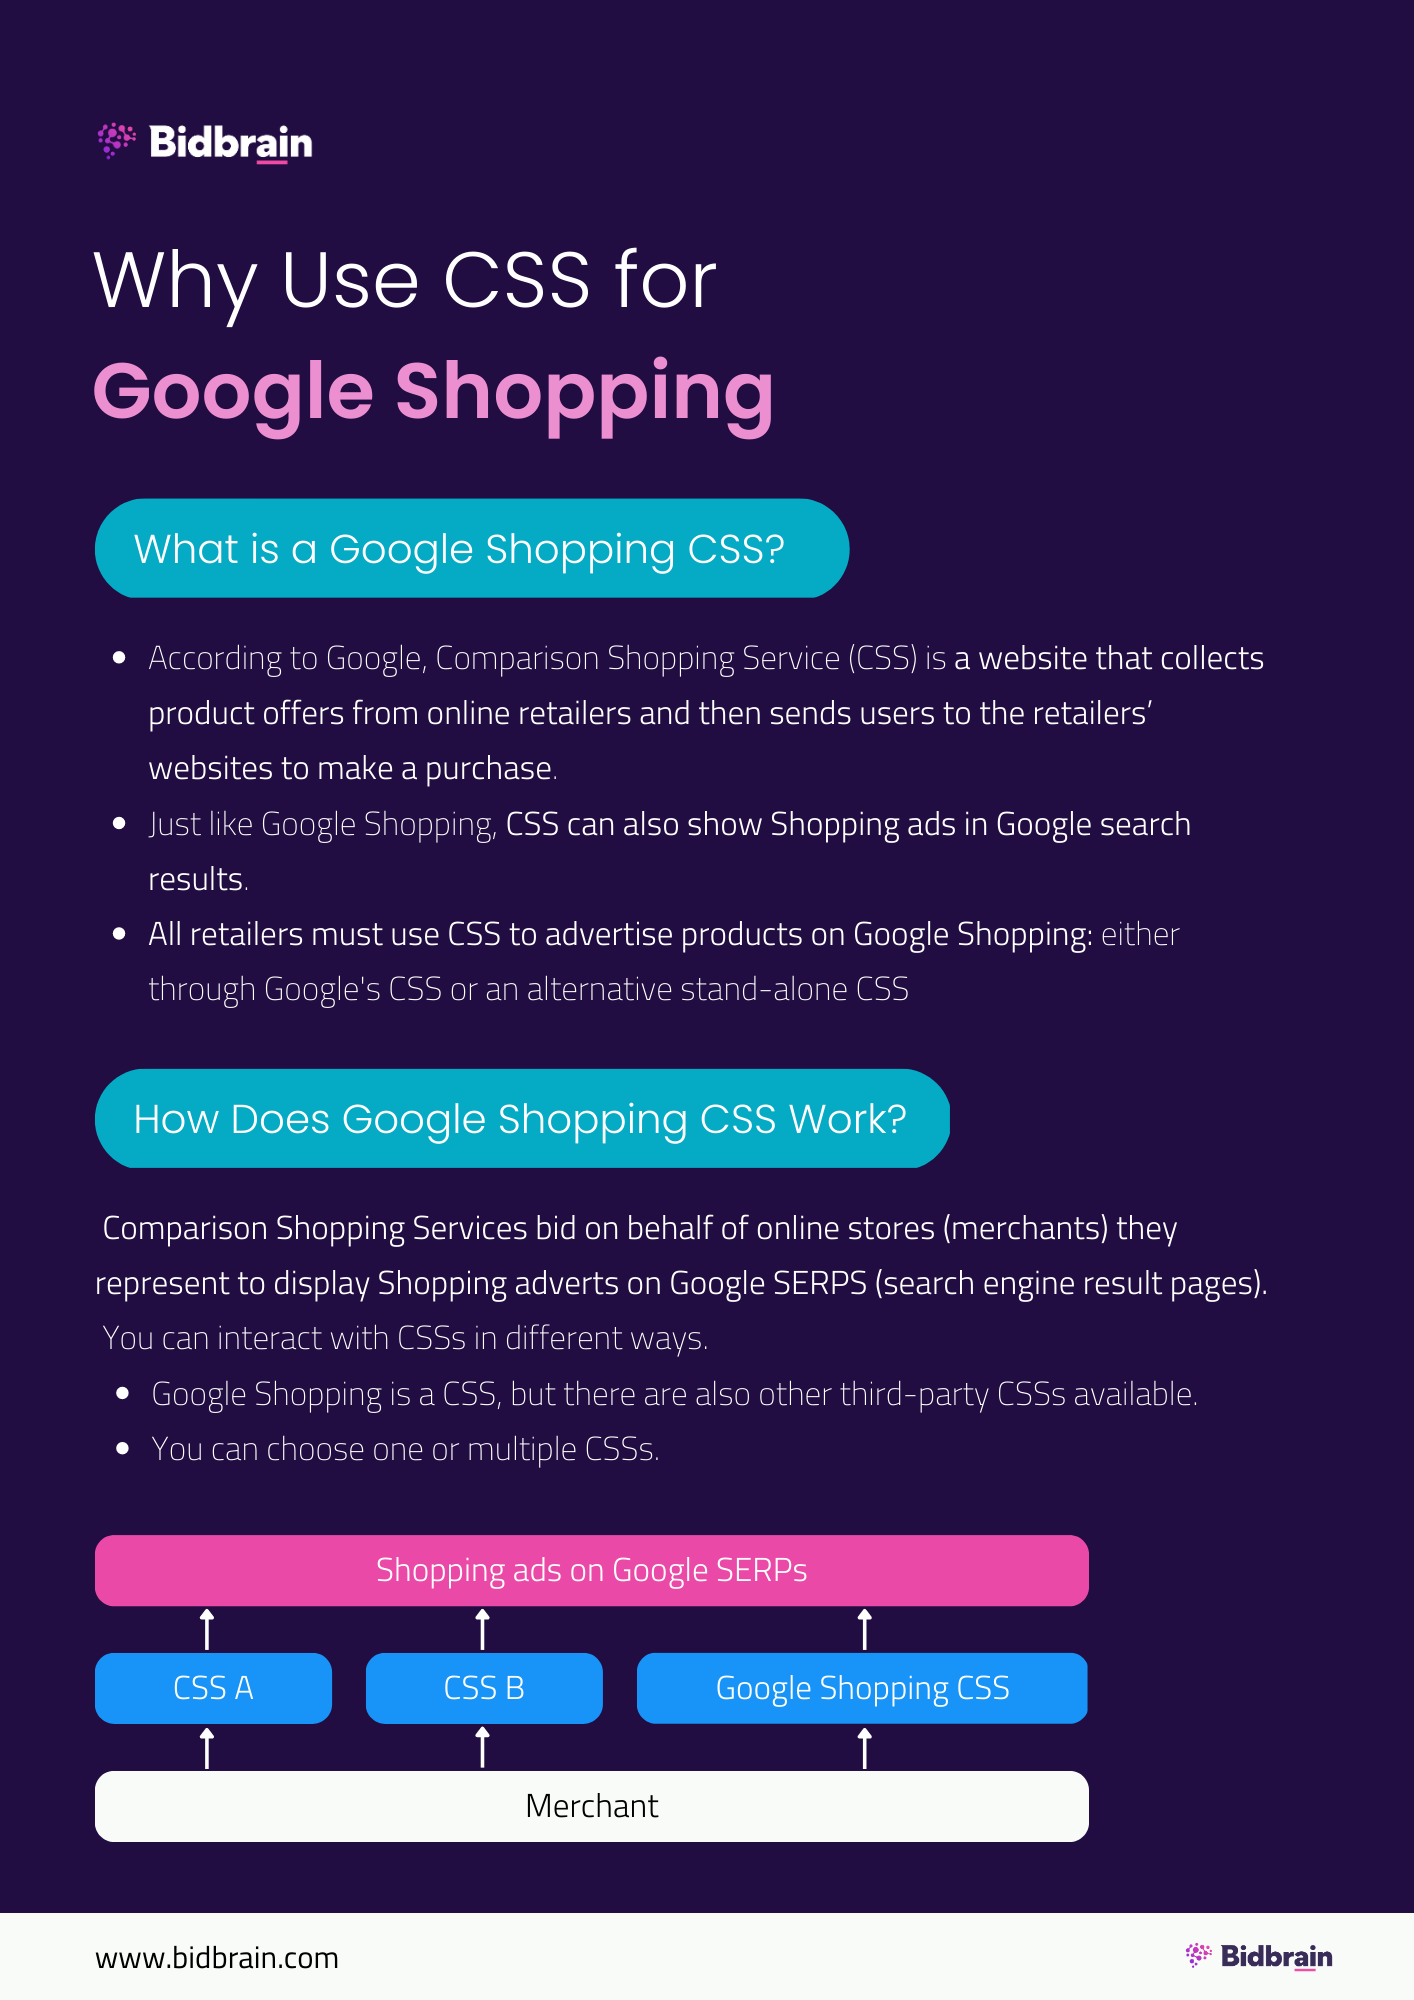 What is Google Shopping CSS